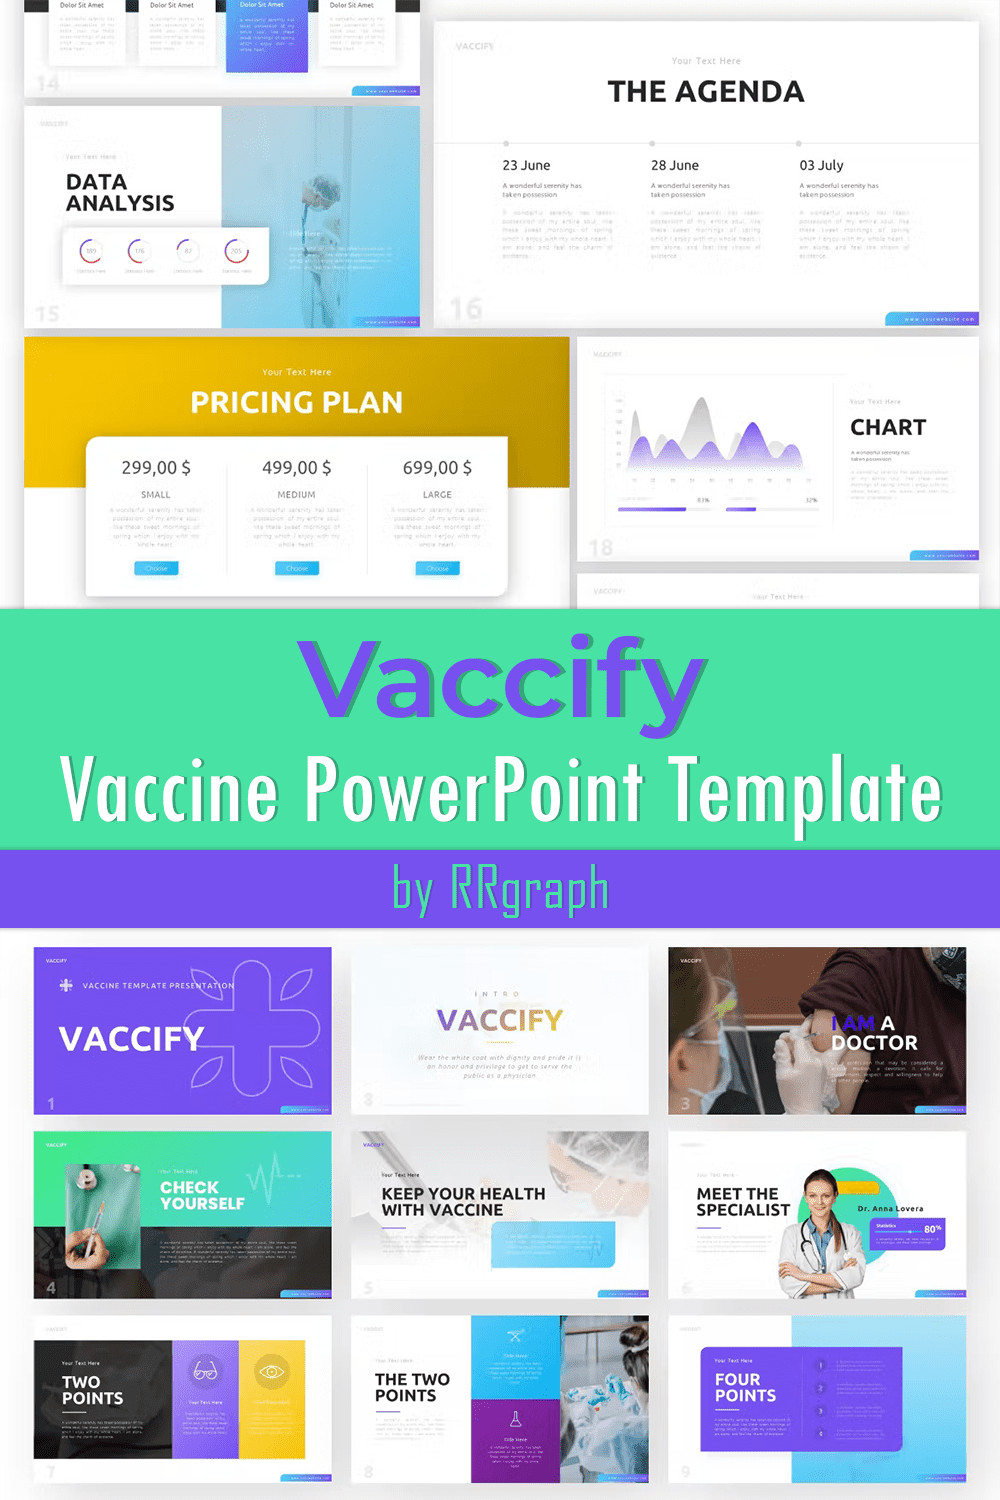 The features of the Vaccify Vaccine PowerPoint Template.